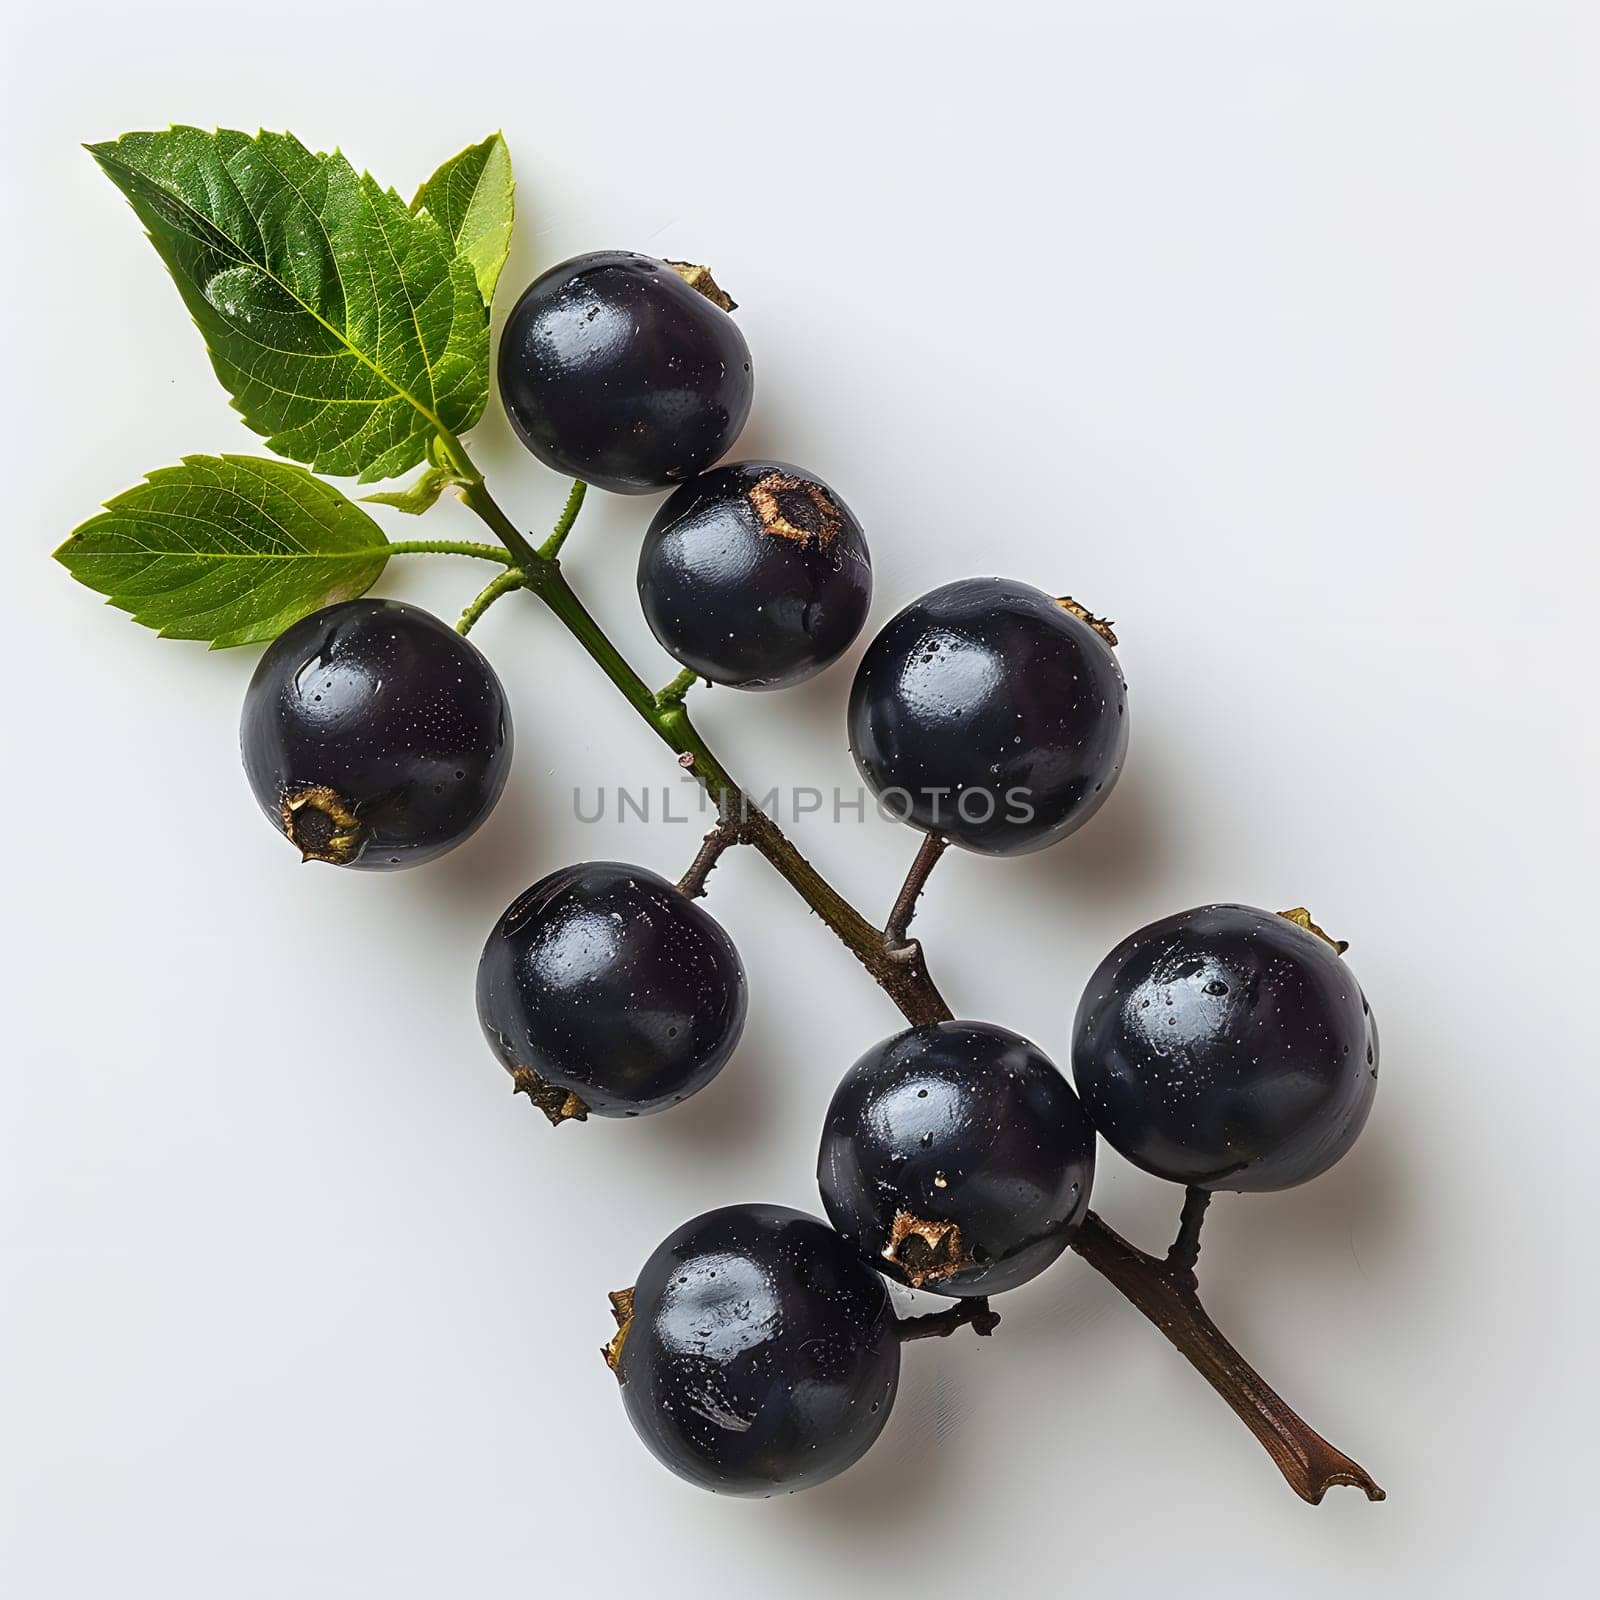 Black currants, a type of berrybearing fruit plant, are depicted in this elegant artwork with green leaves against a white background. A symbol of natural foods and beauty